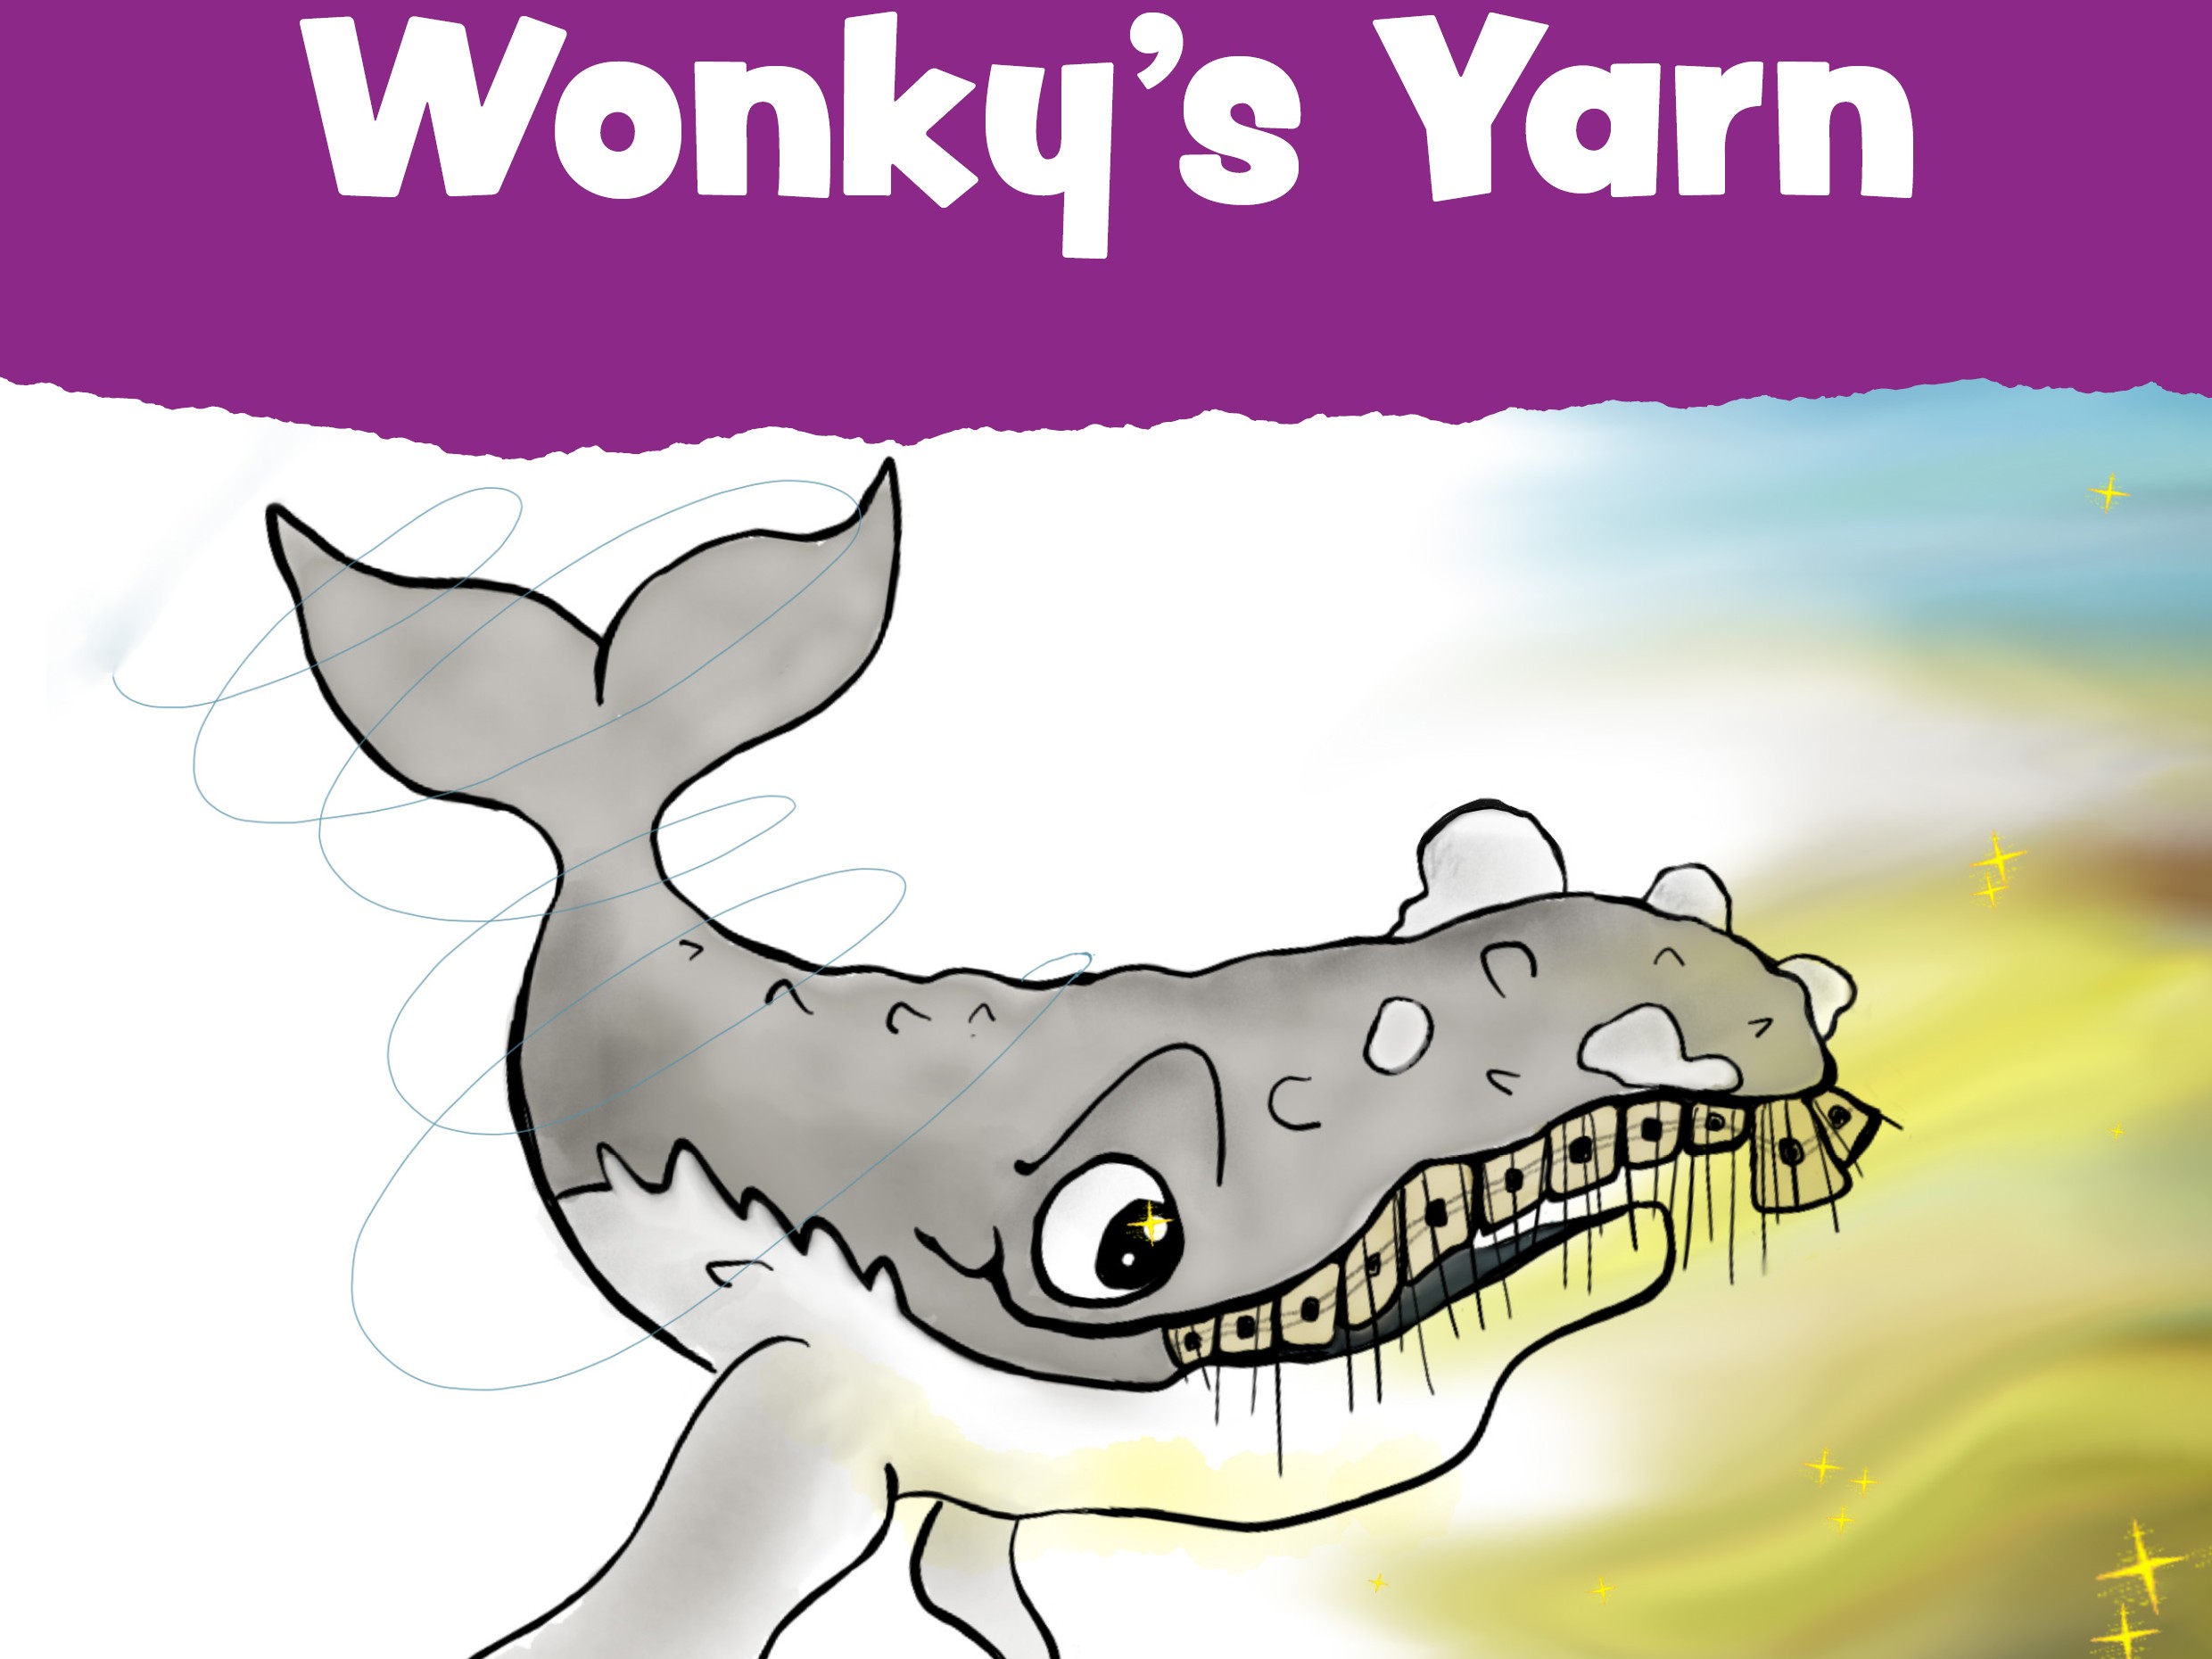 artistic graphic of a whale with the words "Wonky's Yarn"